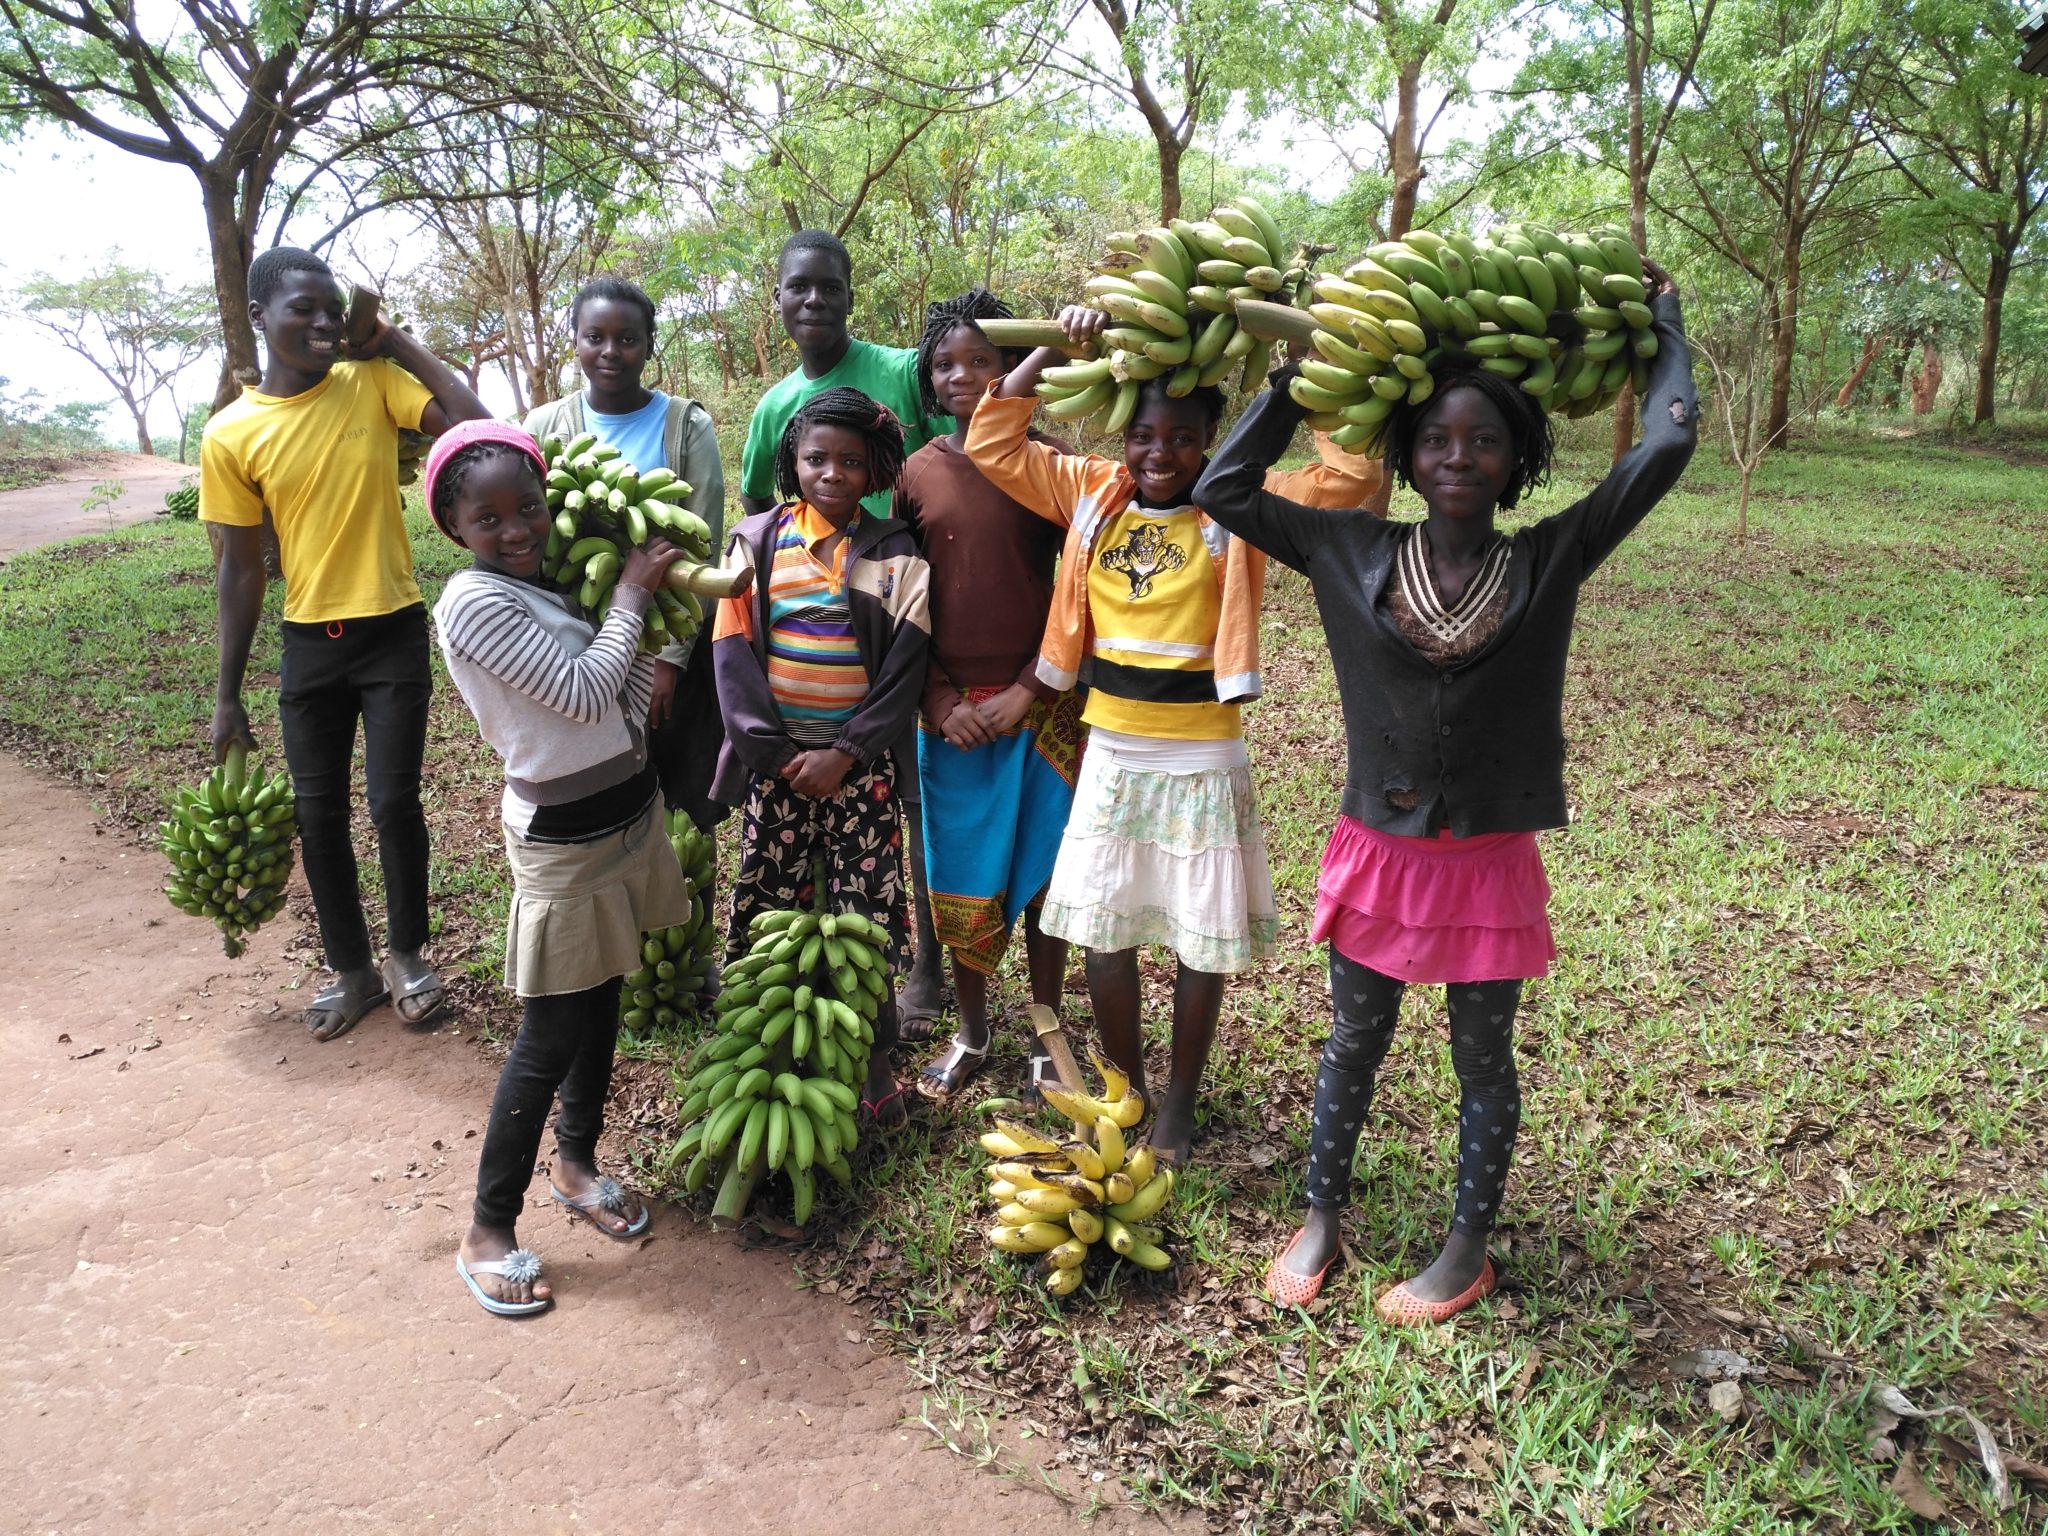 Mozambican students hold bunches of bananas on their shoulders and heads